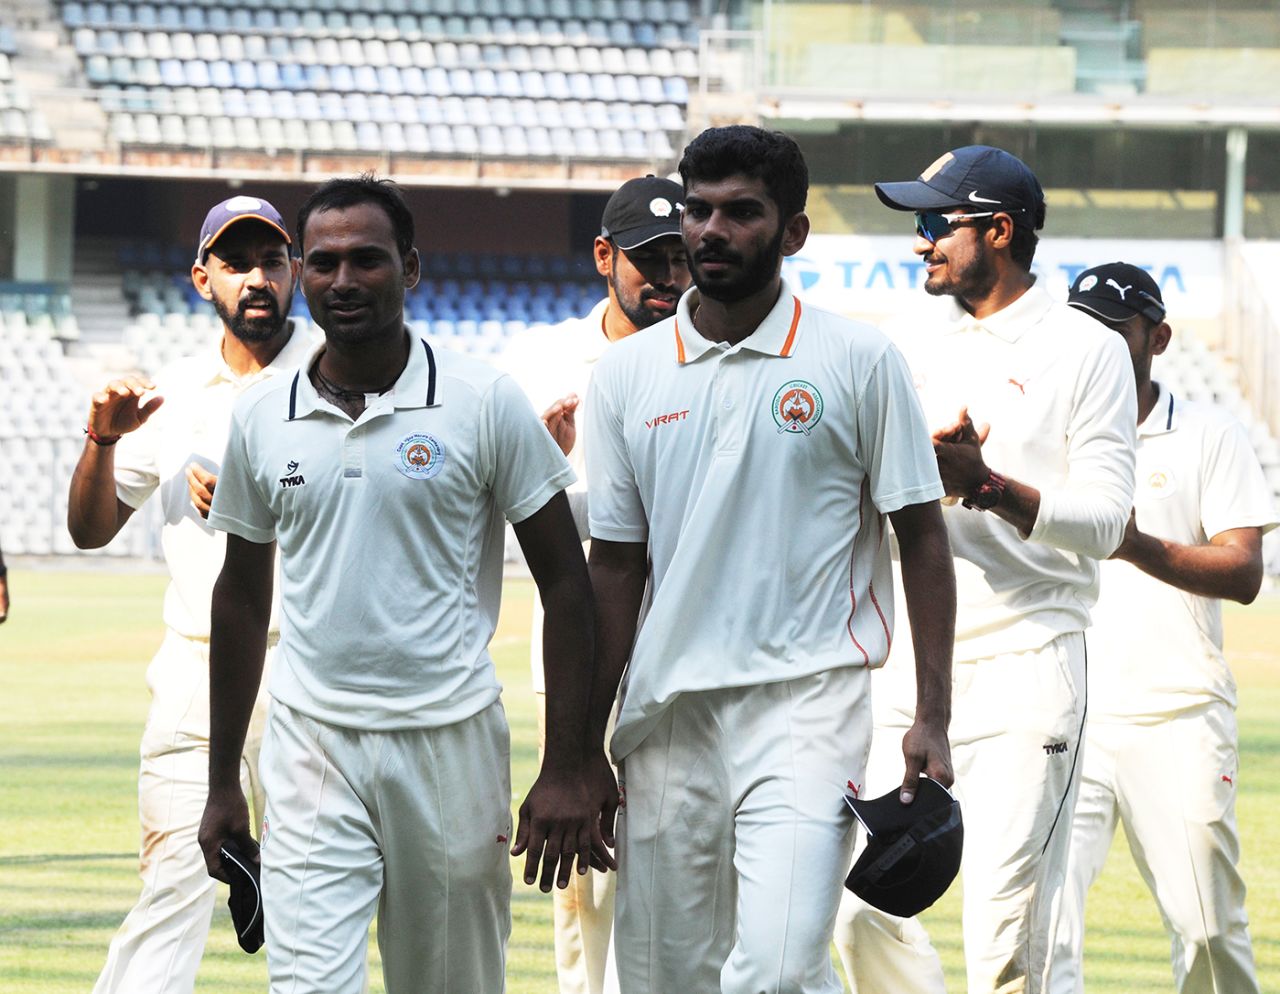 Lukman Meriwala (left) and Atit Sheth are applauded off the field after their five-fors, Mumbai v Baroda, Ranji Trophy 2017-18, Group C, 1st day, Mumbai, November 9, 2017